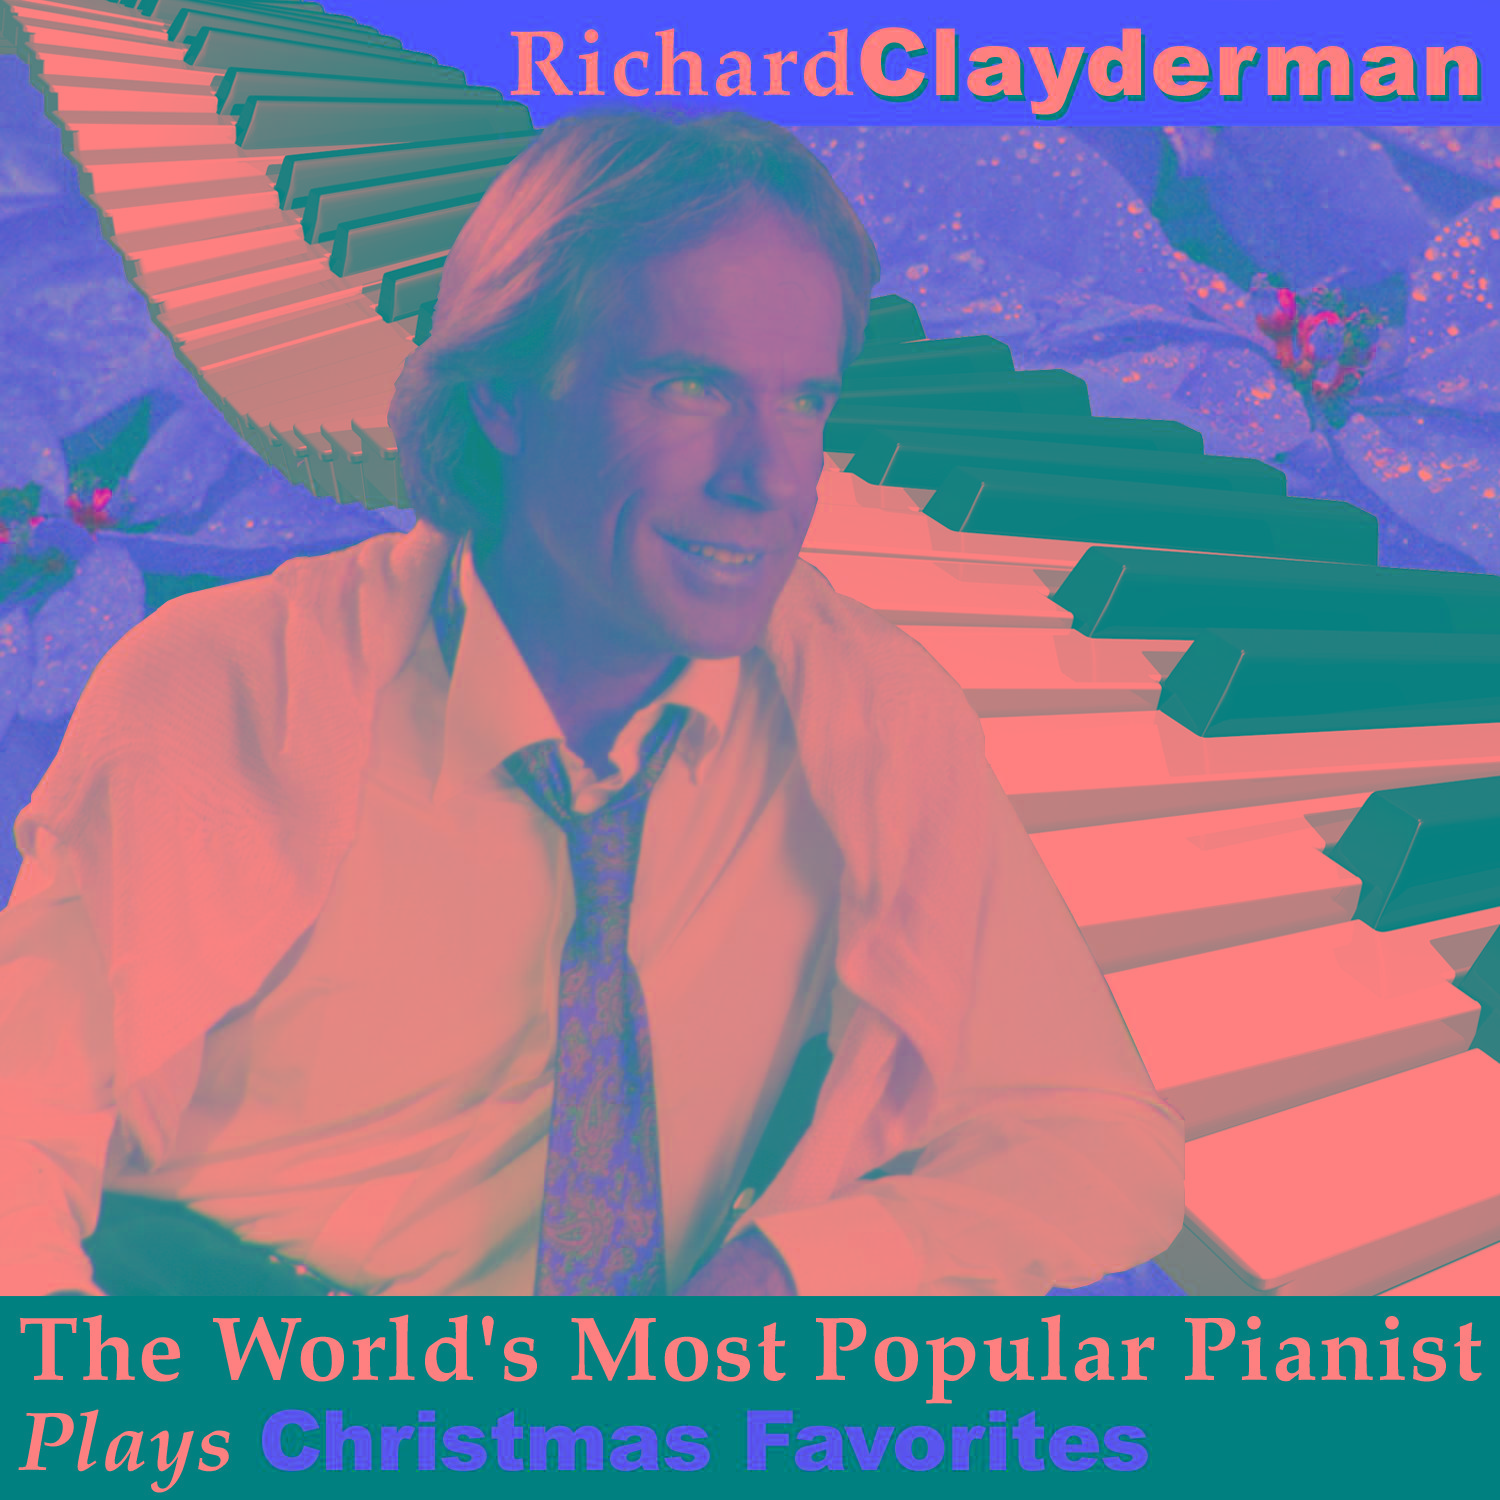 The World's Most Popular Pianist Plays Christmas Favorites